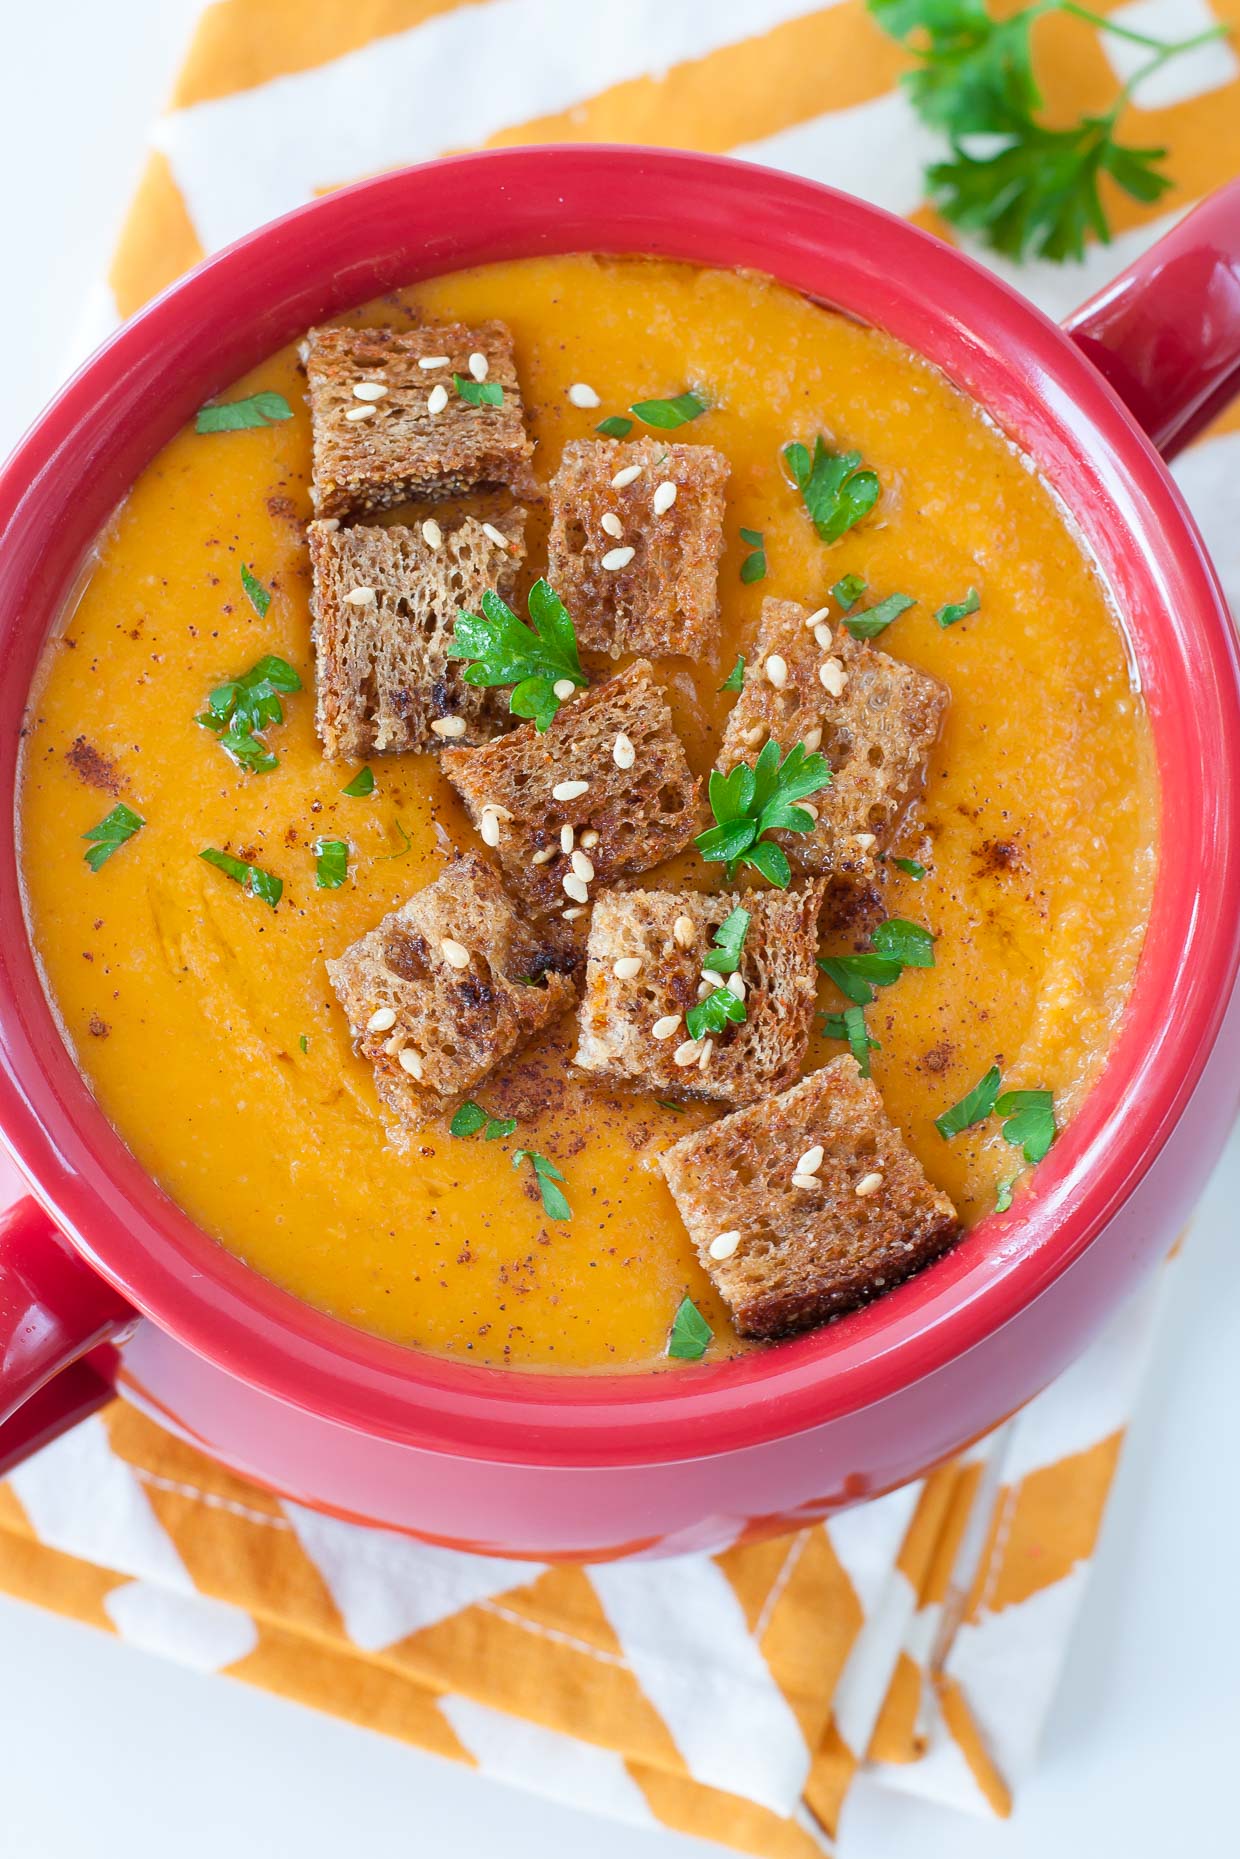 Easy Roasted Carrot and Sweet Potato Soup with Garlic Bread Croutons : this velvety vegetarian soup is full of flavor and so easy to make!